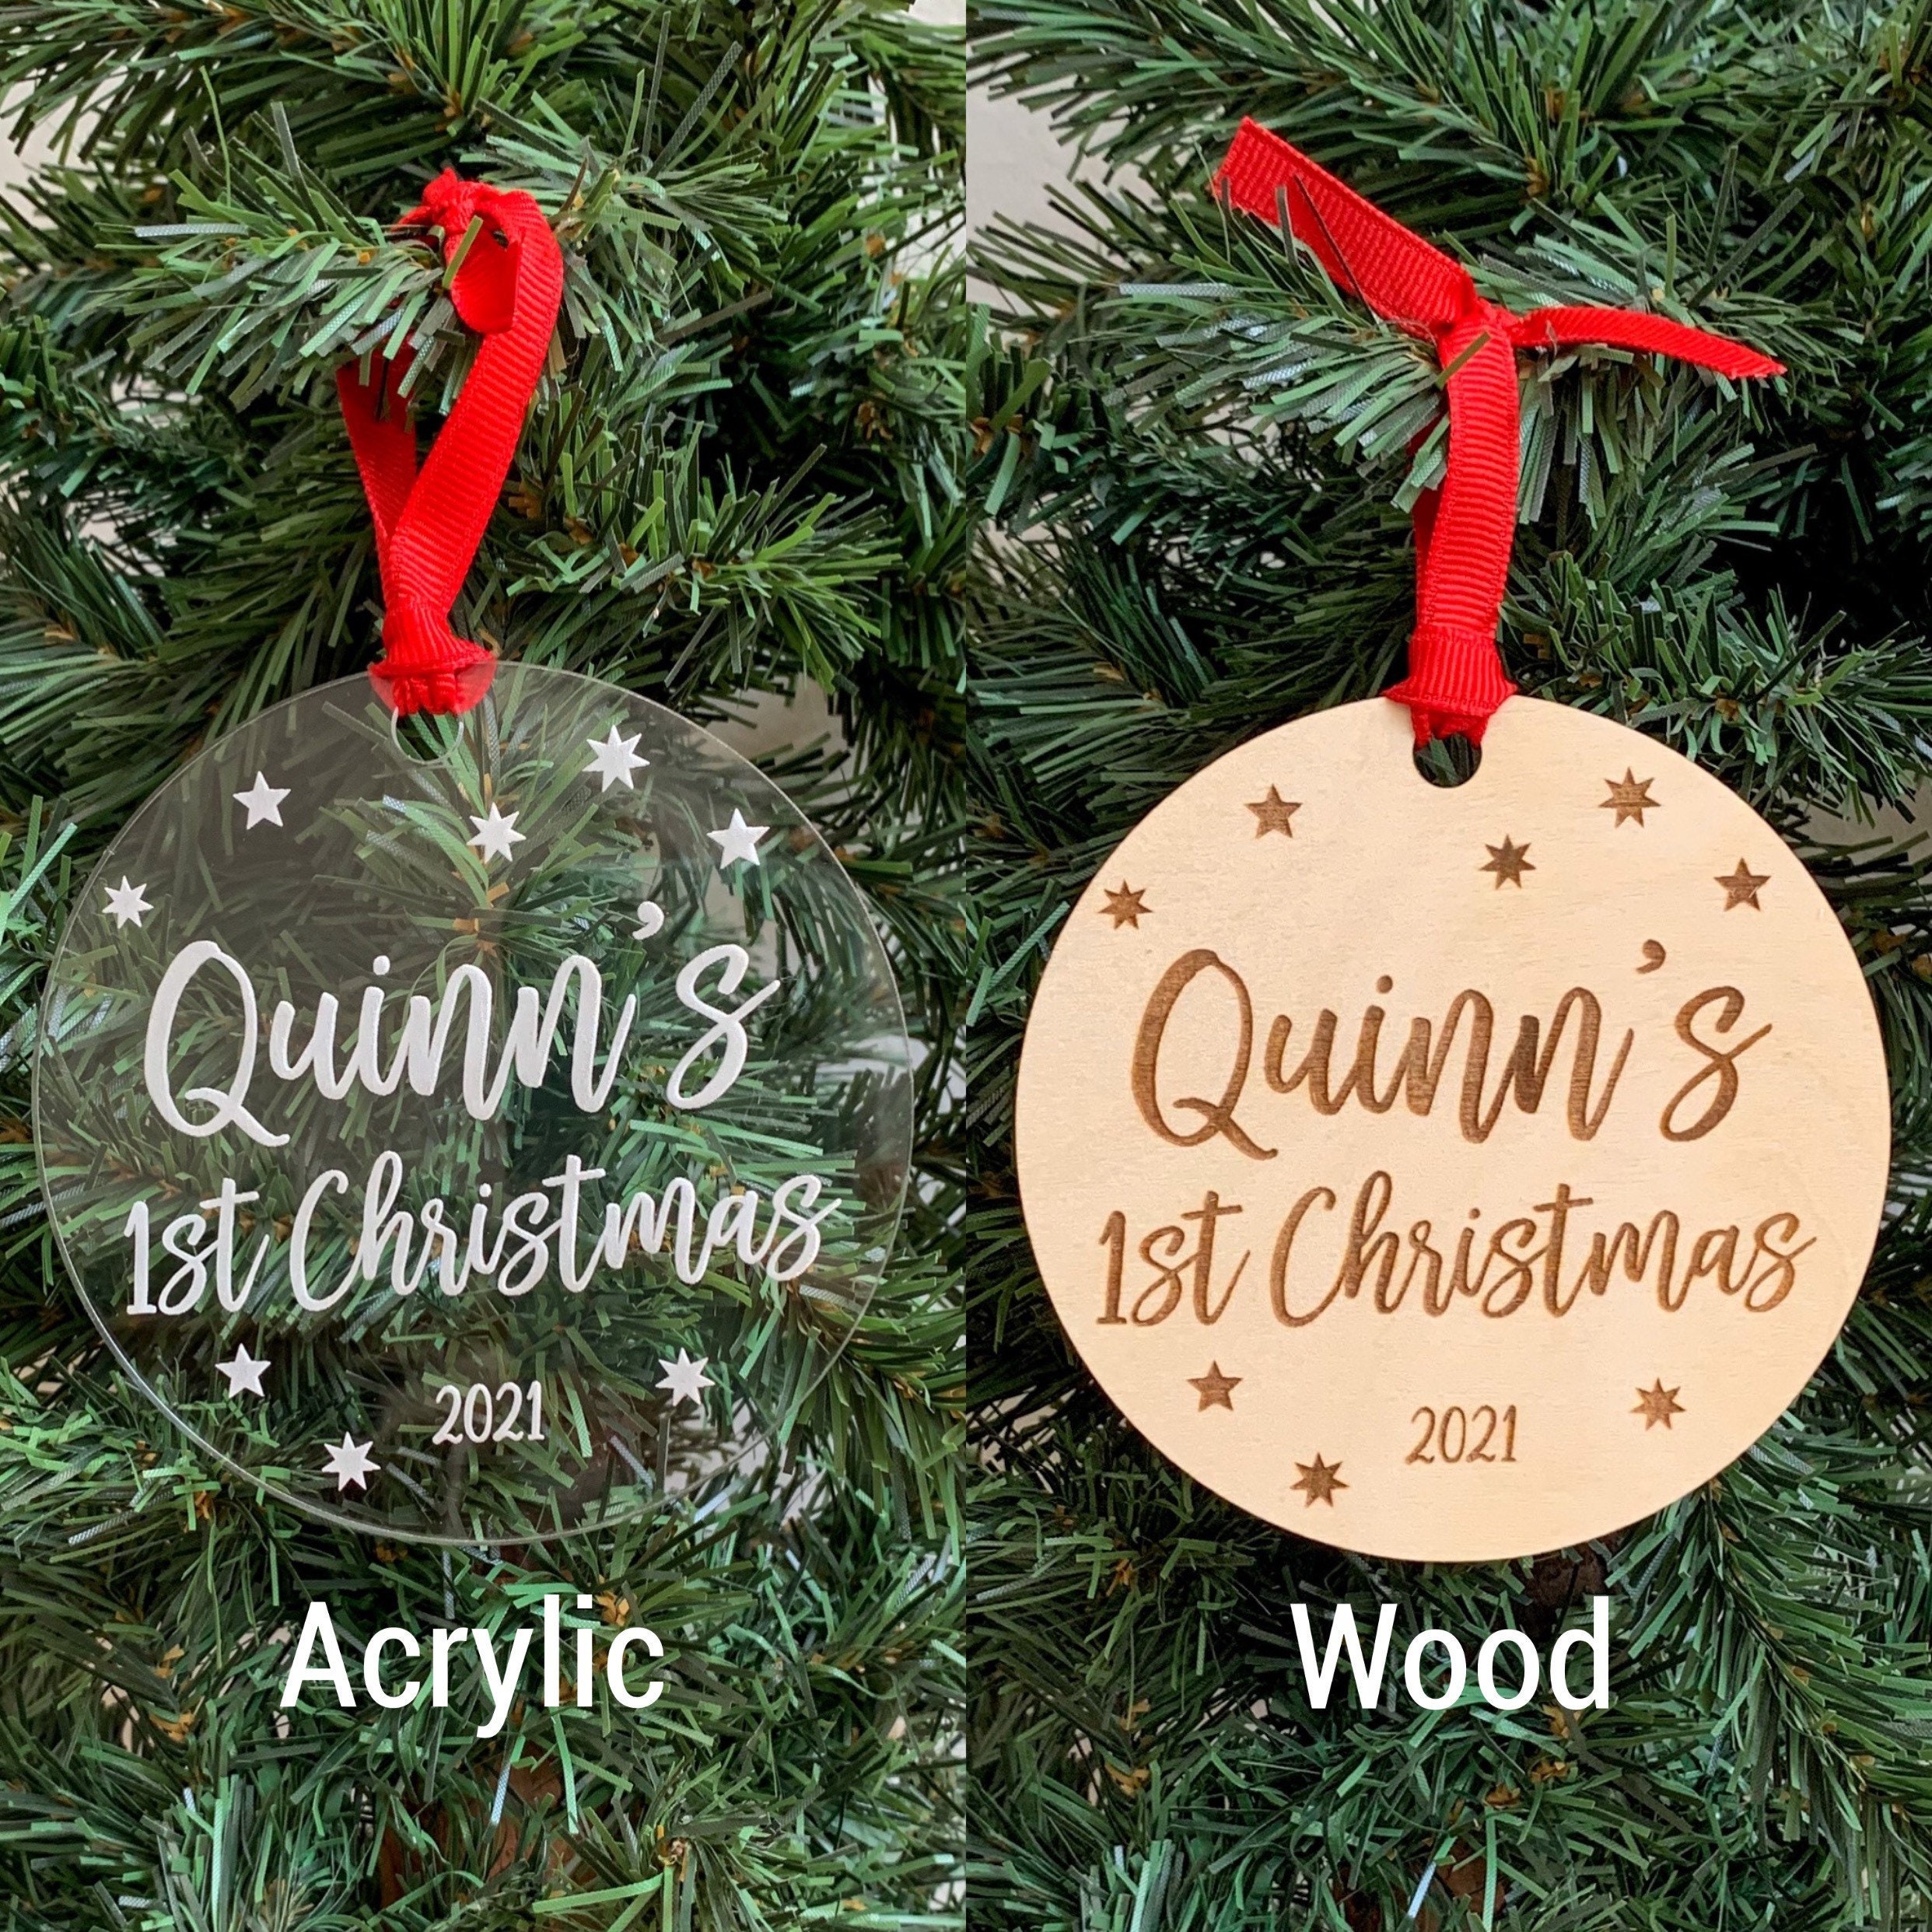 Child Height Ornament - Ornament Keepsake - Personalized Ornament from  Child - Christmas Tradition - Personalized Ornament - Gifting